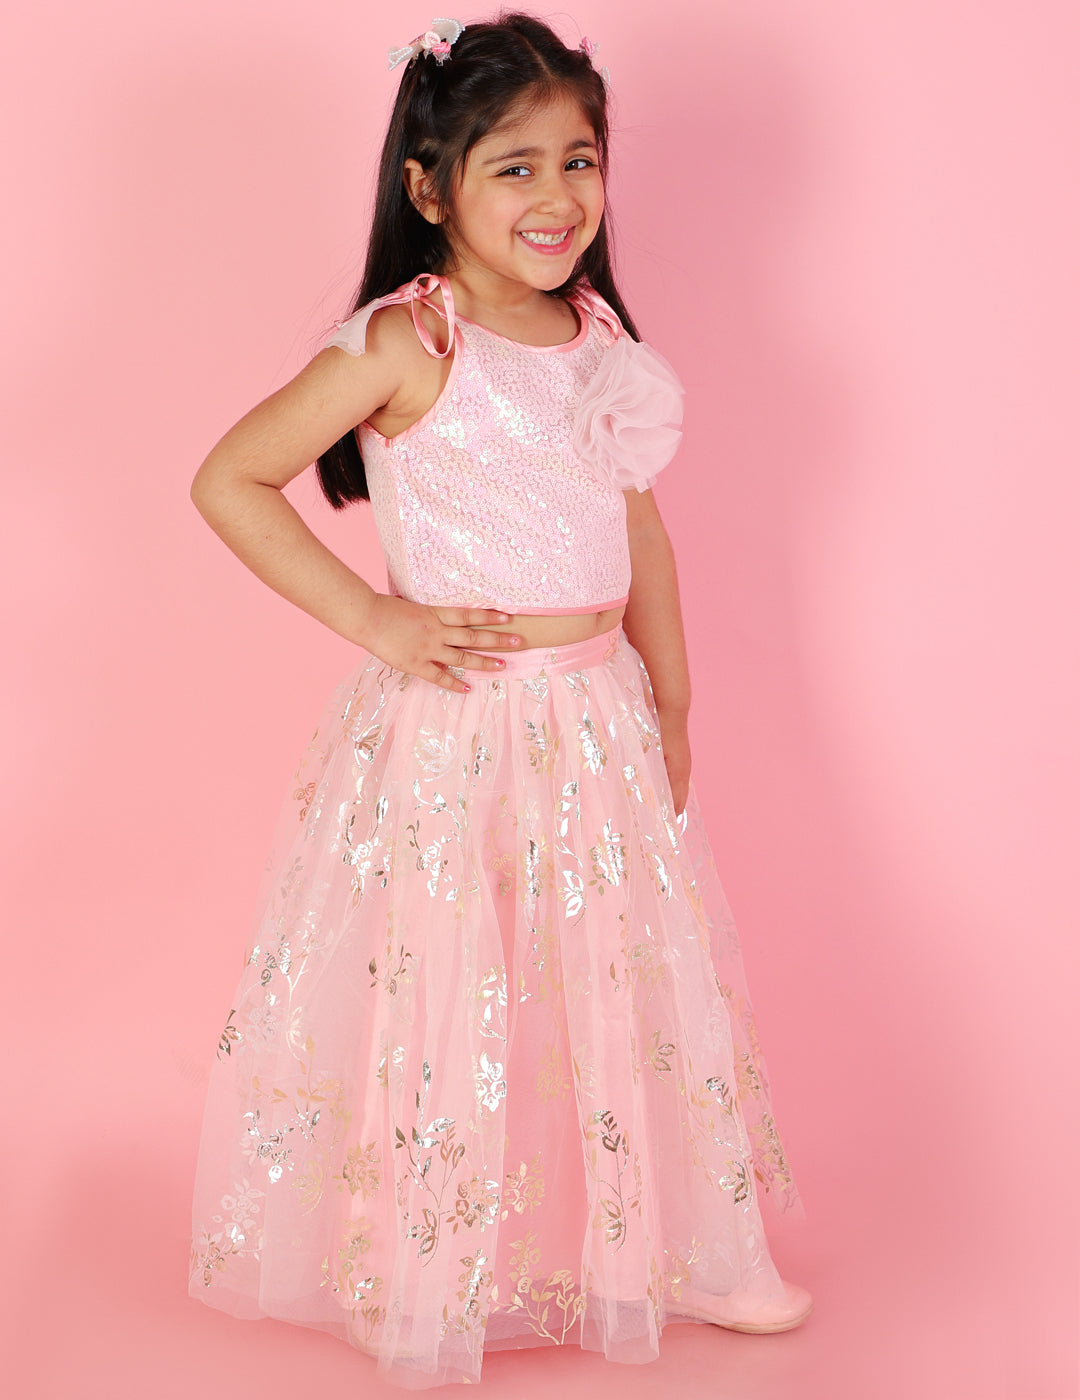 Girl's Sequins Top With Flower Corsage & Foil Printed Skirt-Pink - Lil Peacock